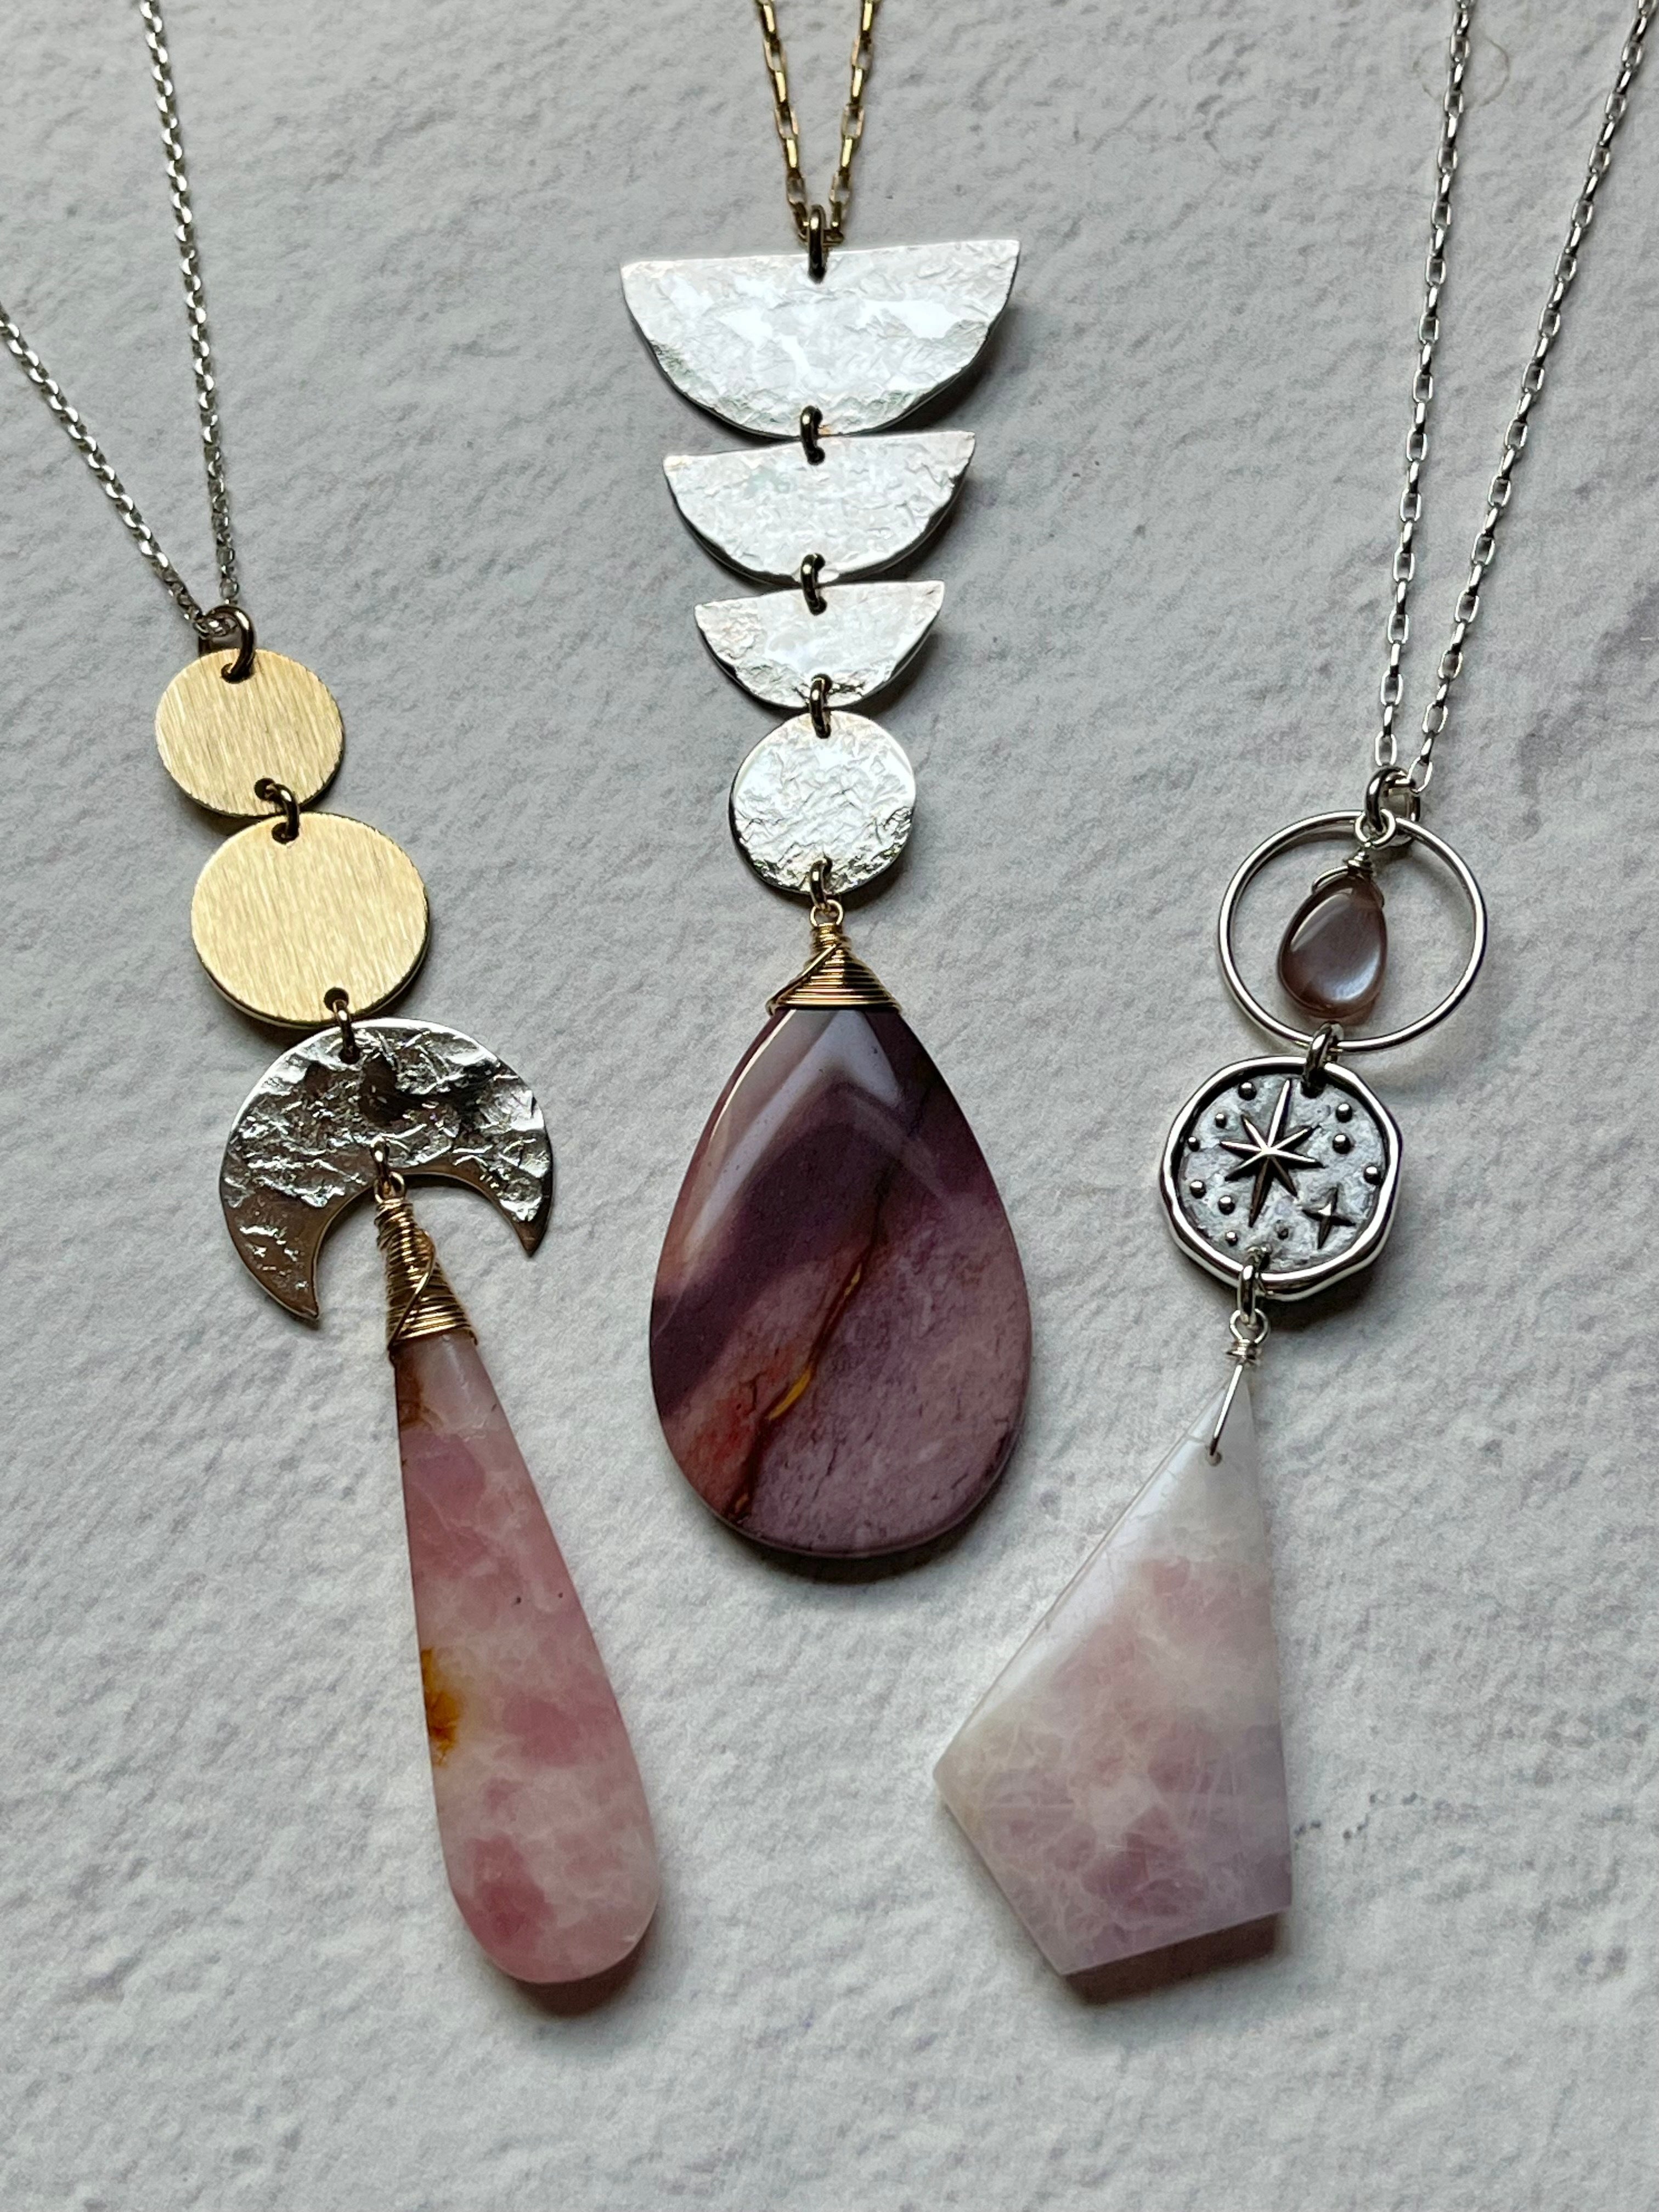 •NYX• pink amethyst + peach moonstone + star coin + sterling silver necklace (26"-28")